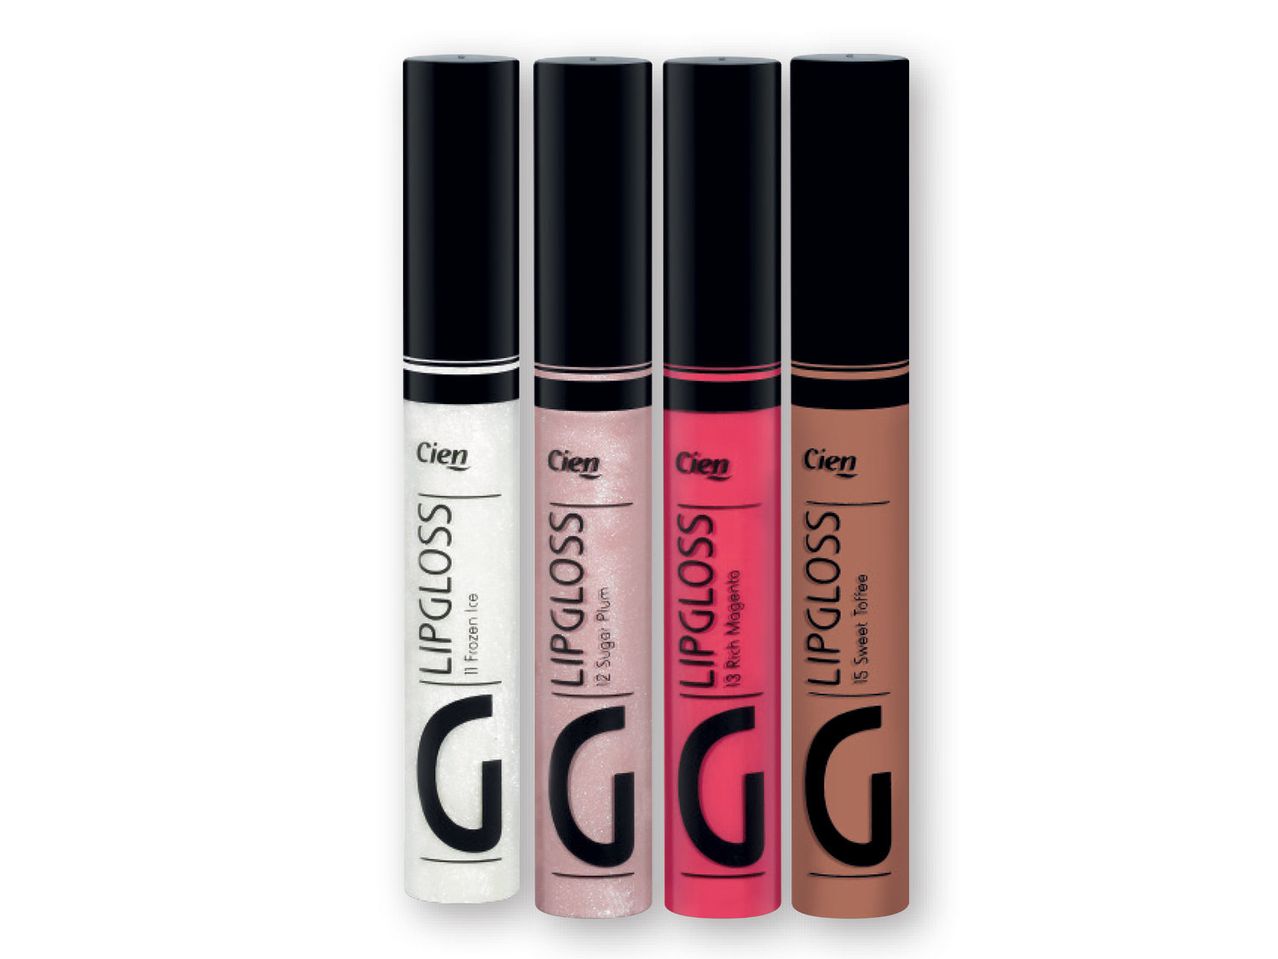 Go to full screen view: CIEN Lip Gloss - Image 1